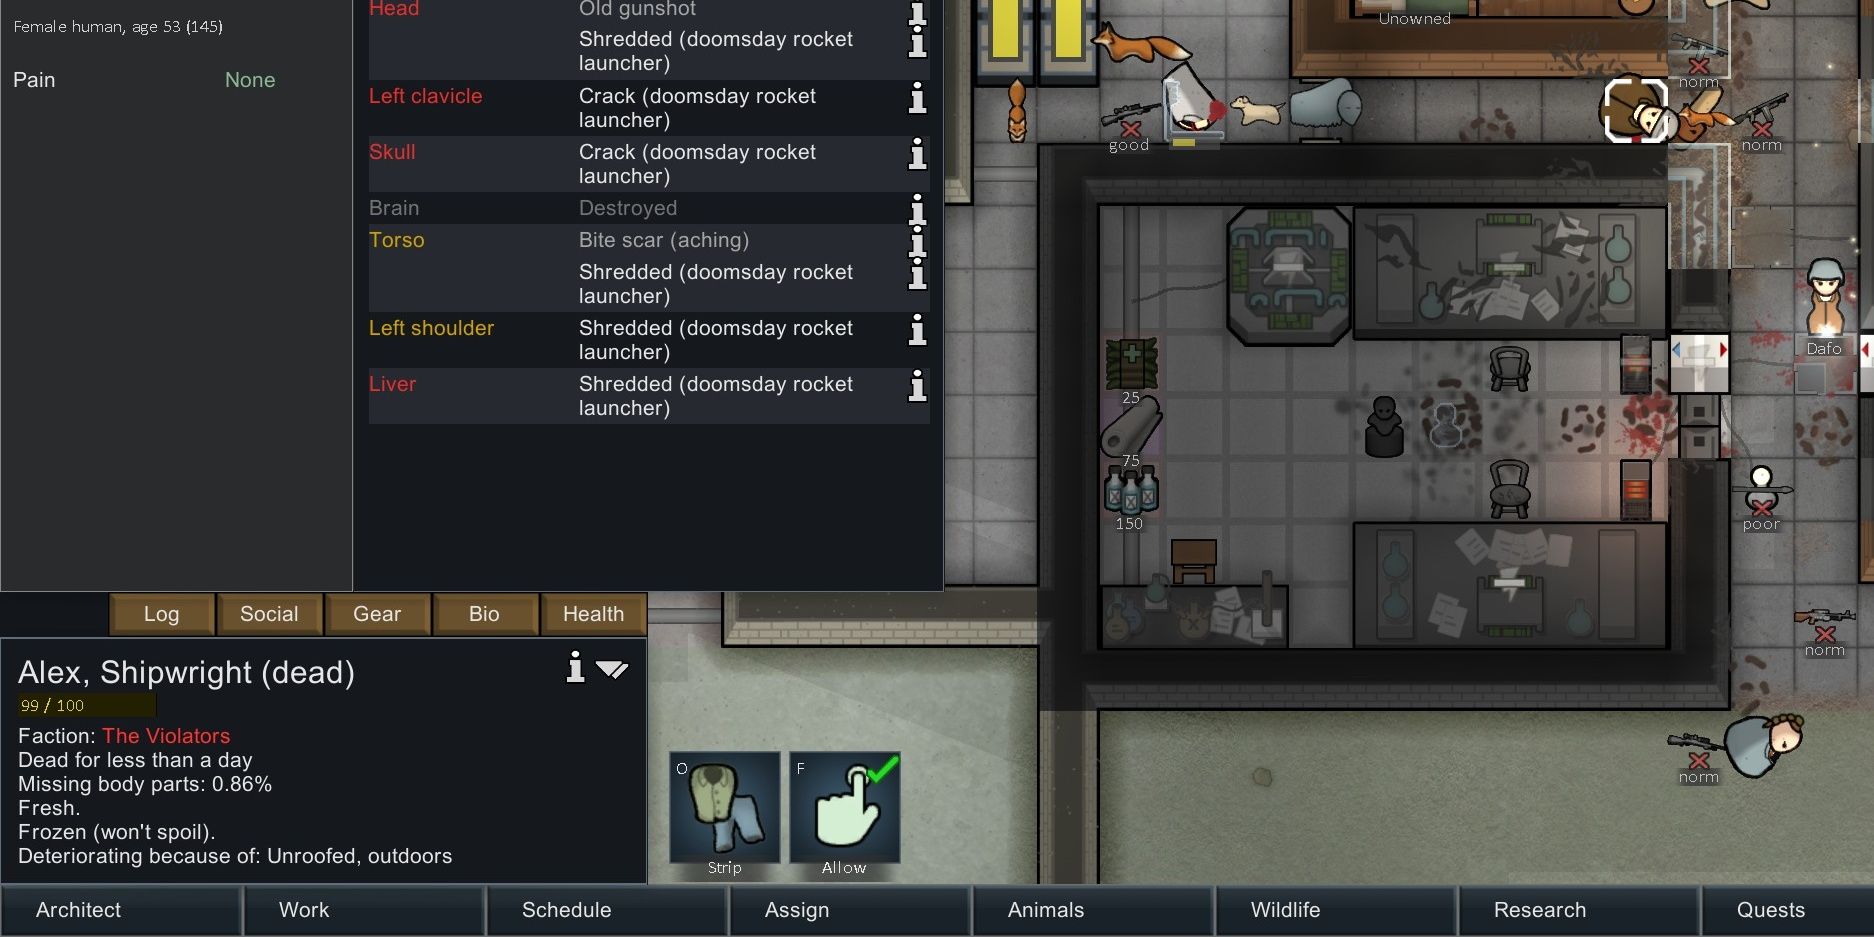 A raider who died from the Doomsday Rocket Launcher and the aftermath of killing a bunch of the colonists also in RimWorld